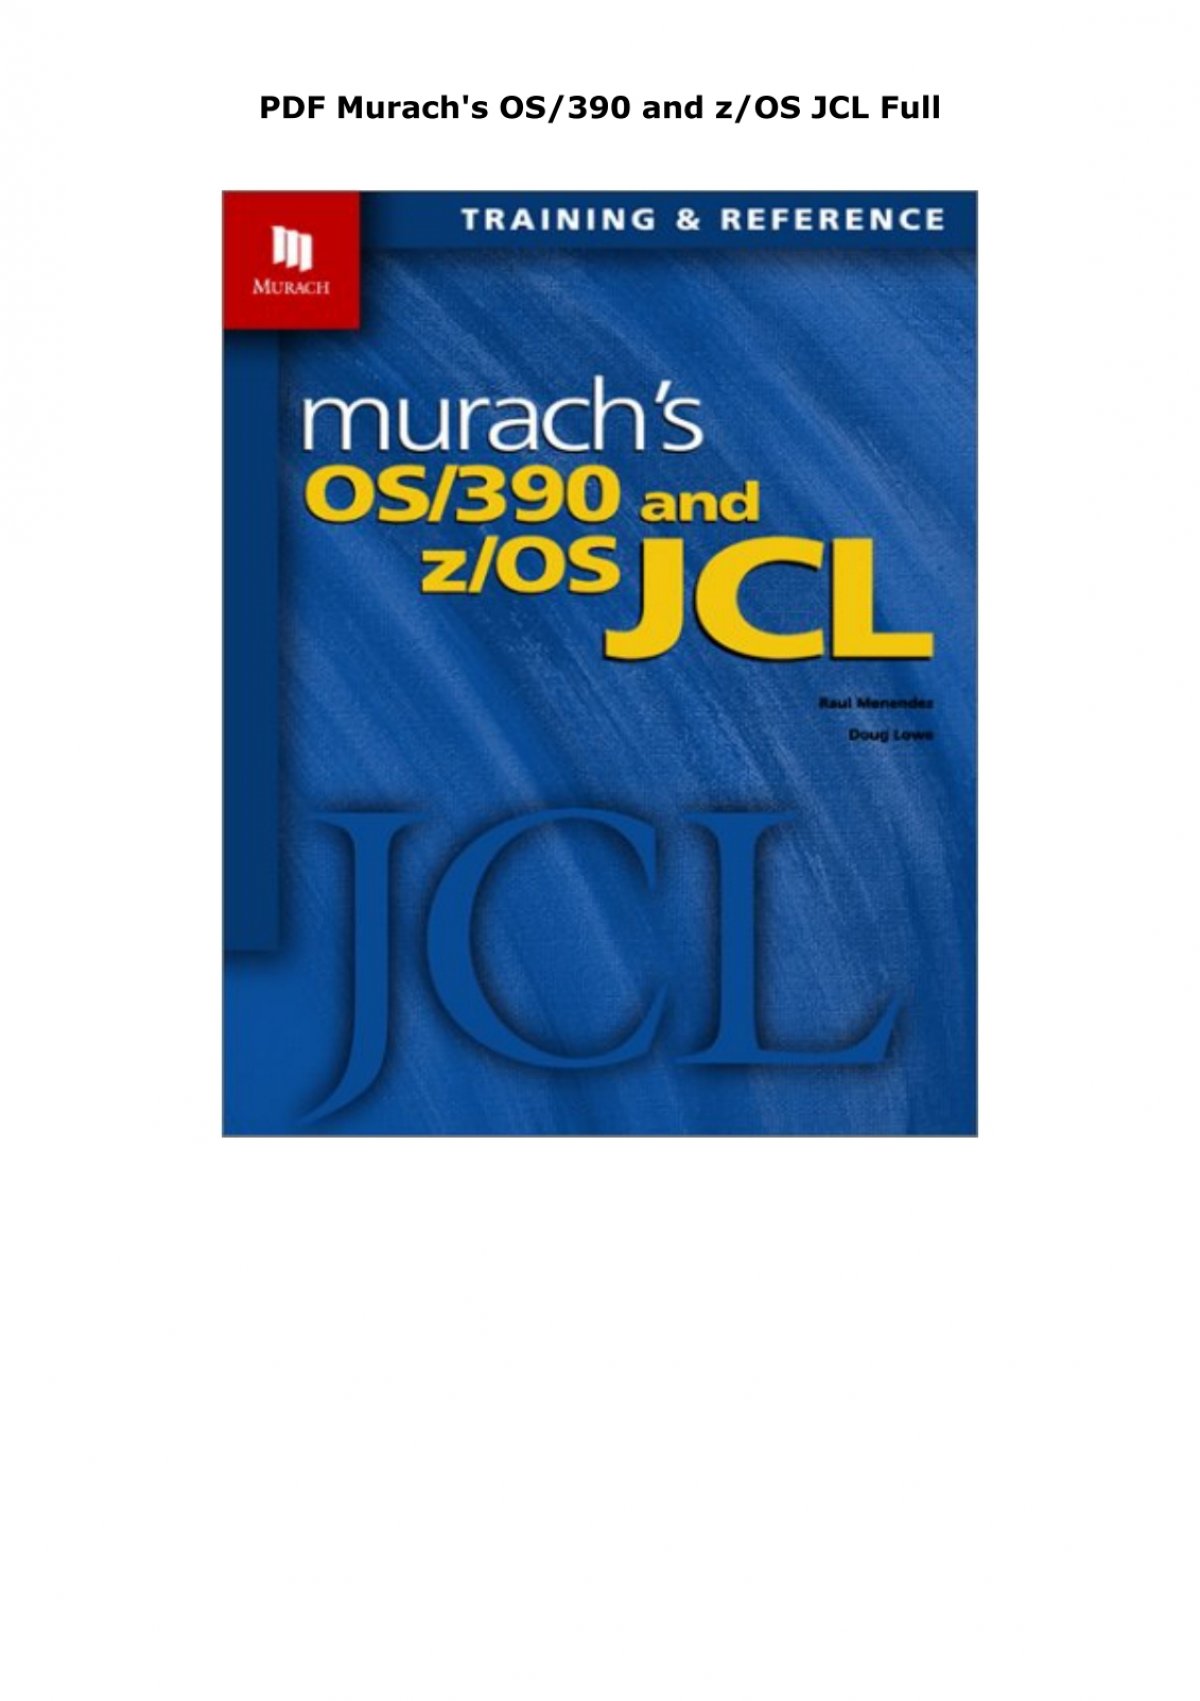 PDF Murach's OS/390 and z/OS JCL Full